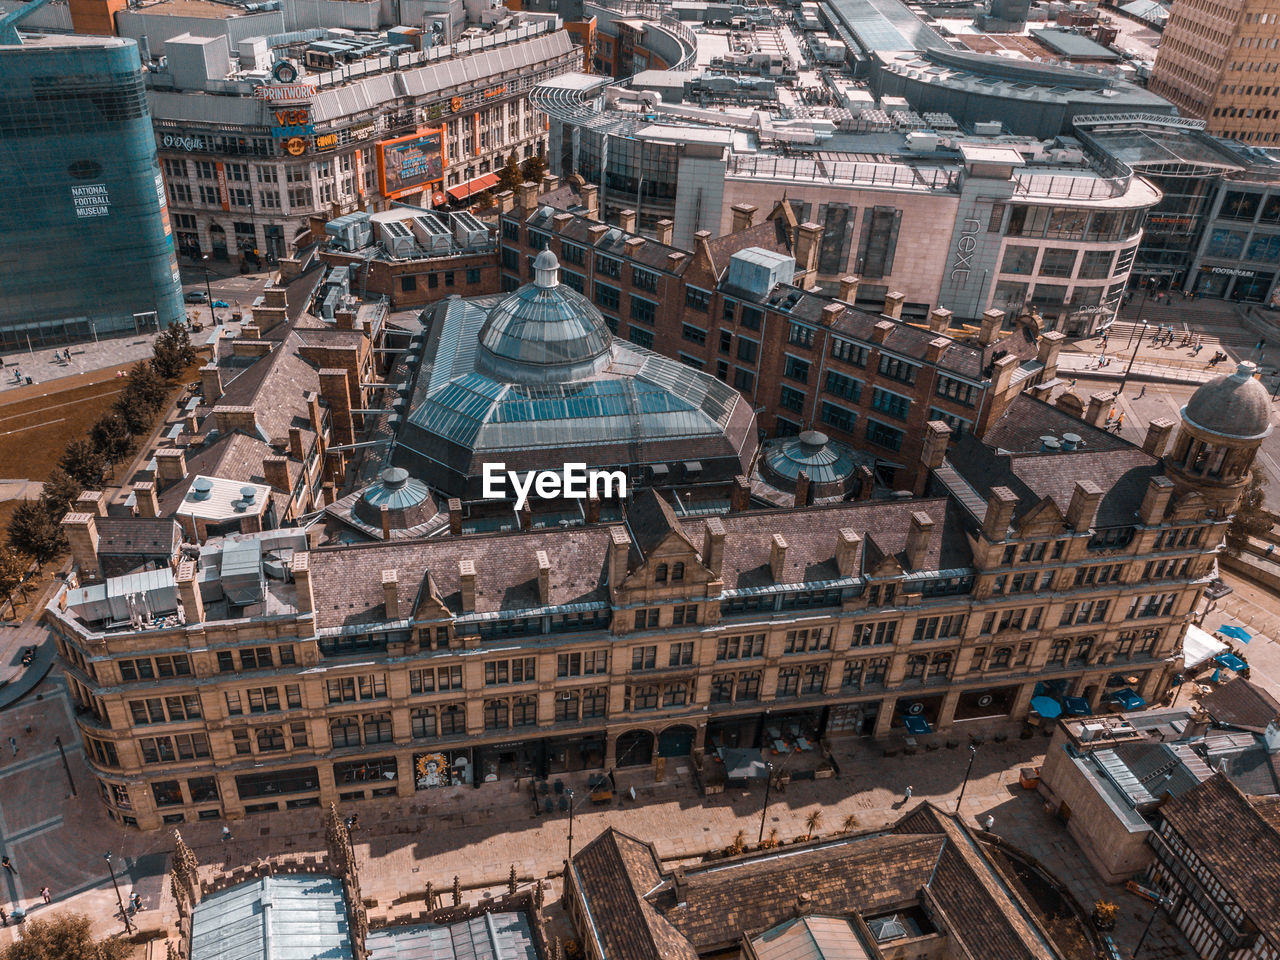 Aerial drone shot of the corn exchange building in manchester